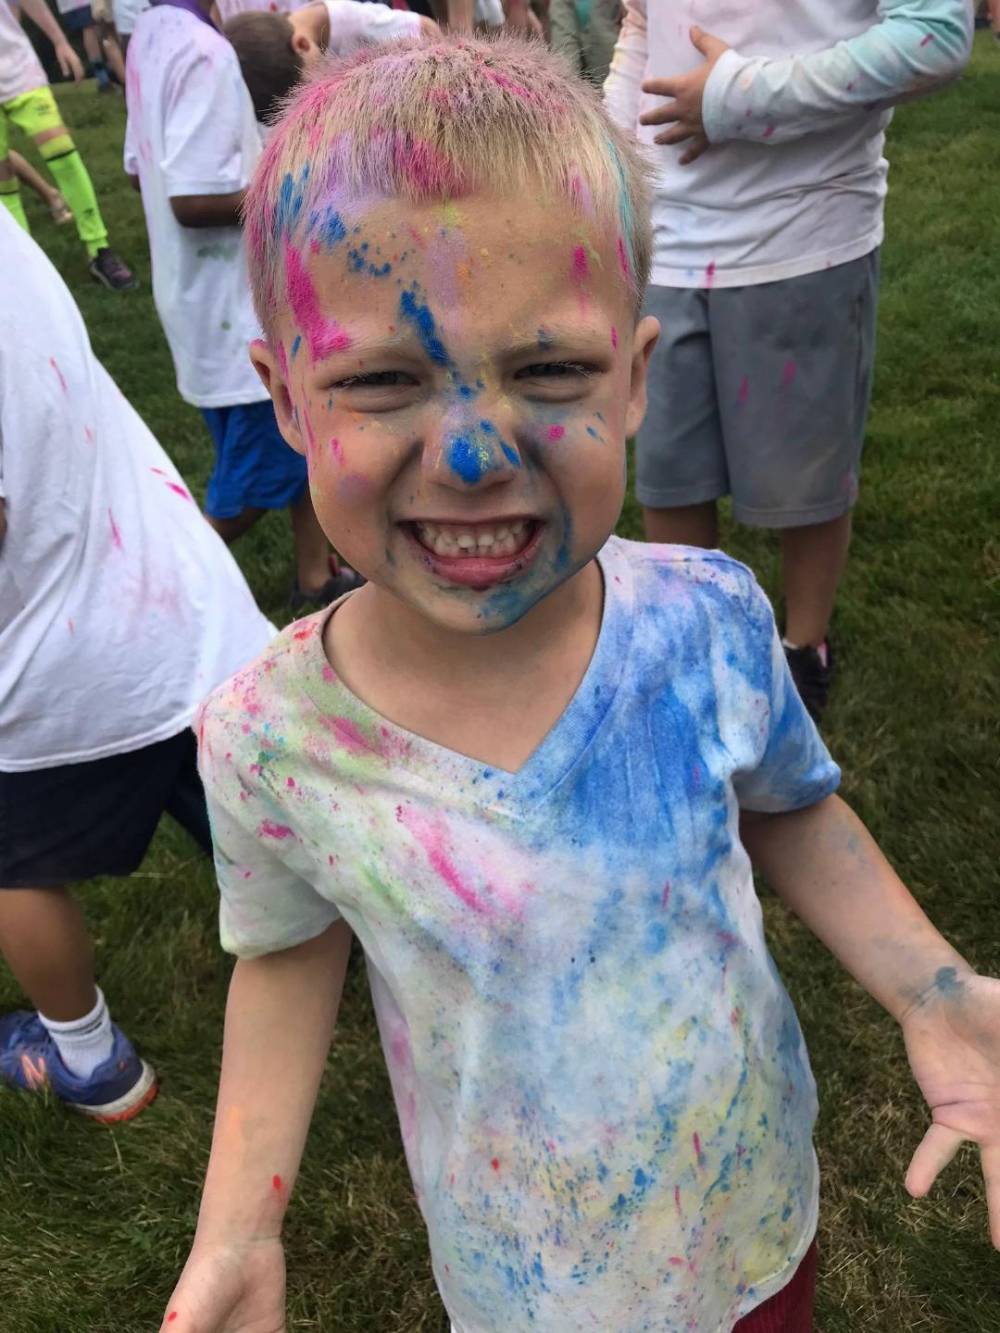 TOP ILLINOIS COED CAMP: Good Times Day Camp Libertyville is a Top Coed Summer Camp located in Libertyville Illinois offering many fun and enriching Coed and other camp programs. Good Times Day Camp Libertyville also offers CIT/LIT and/or Teen Leadership Opportunities, too.